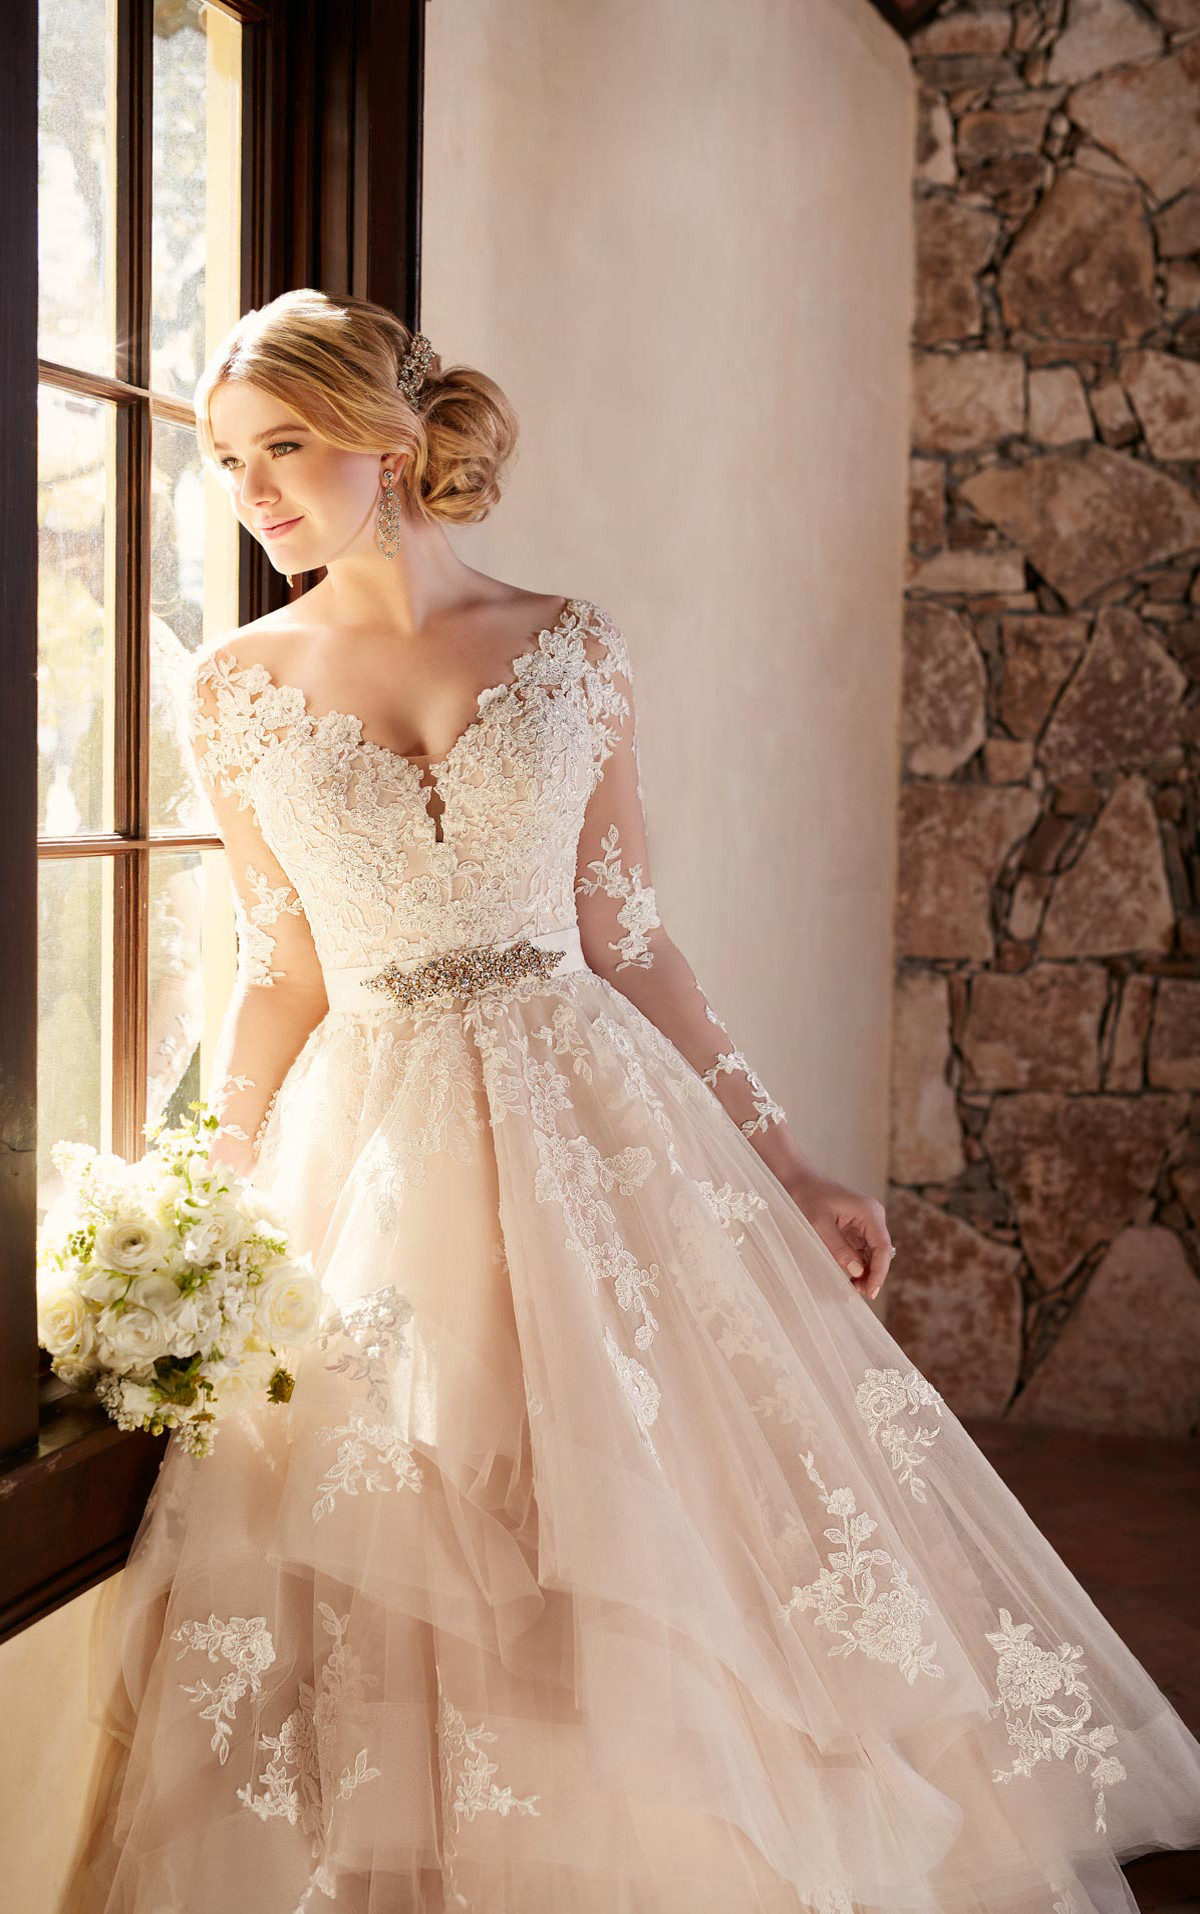 Wedding Dresses With Lace Sleeves
 Sleeved Wedding Dresses